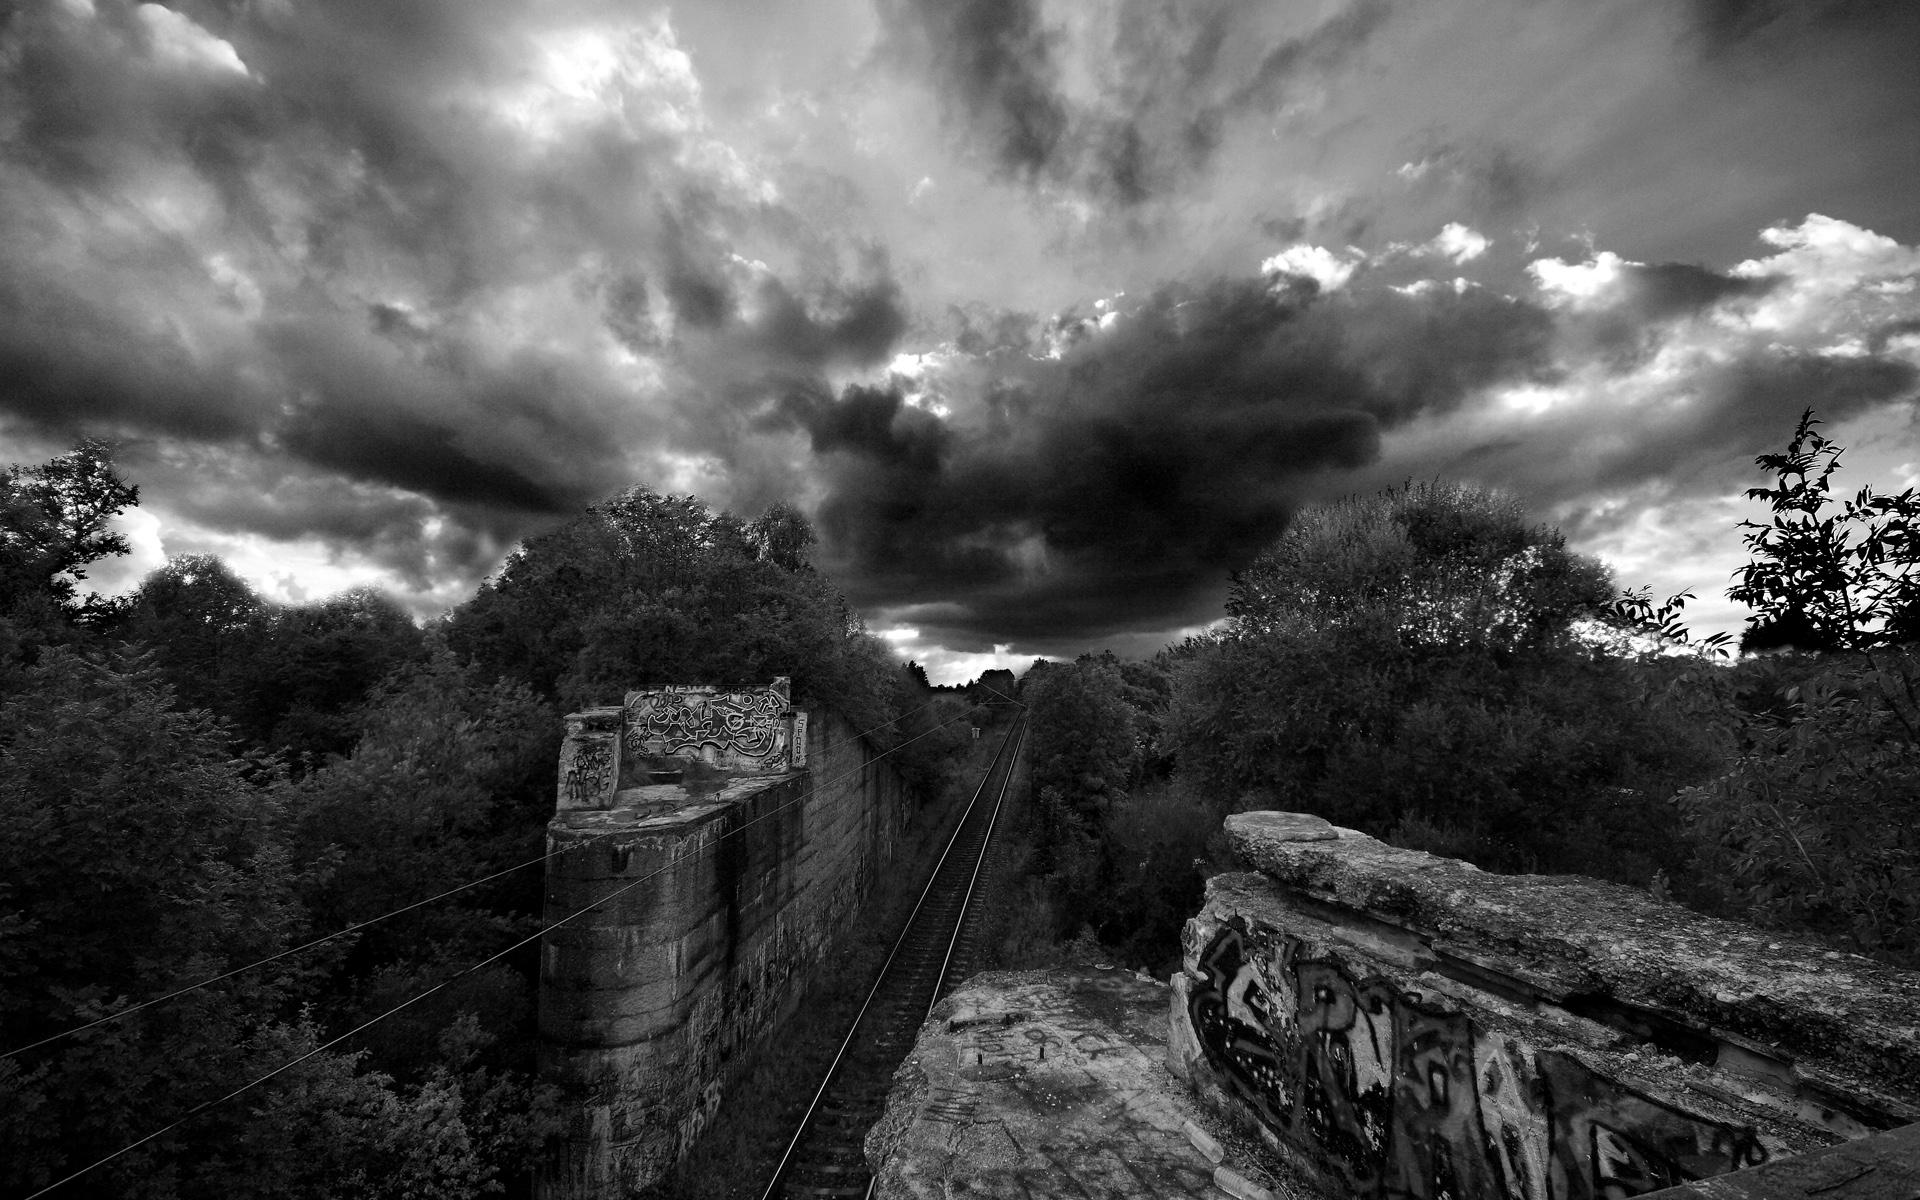 forests, Storm, Trains, Grayscale, Monochrome, Vehicles Wallpaper